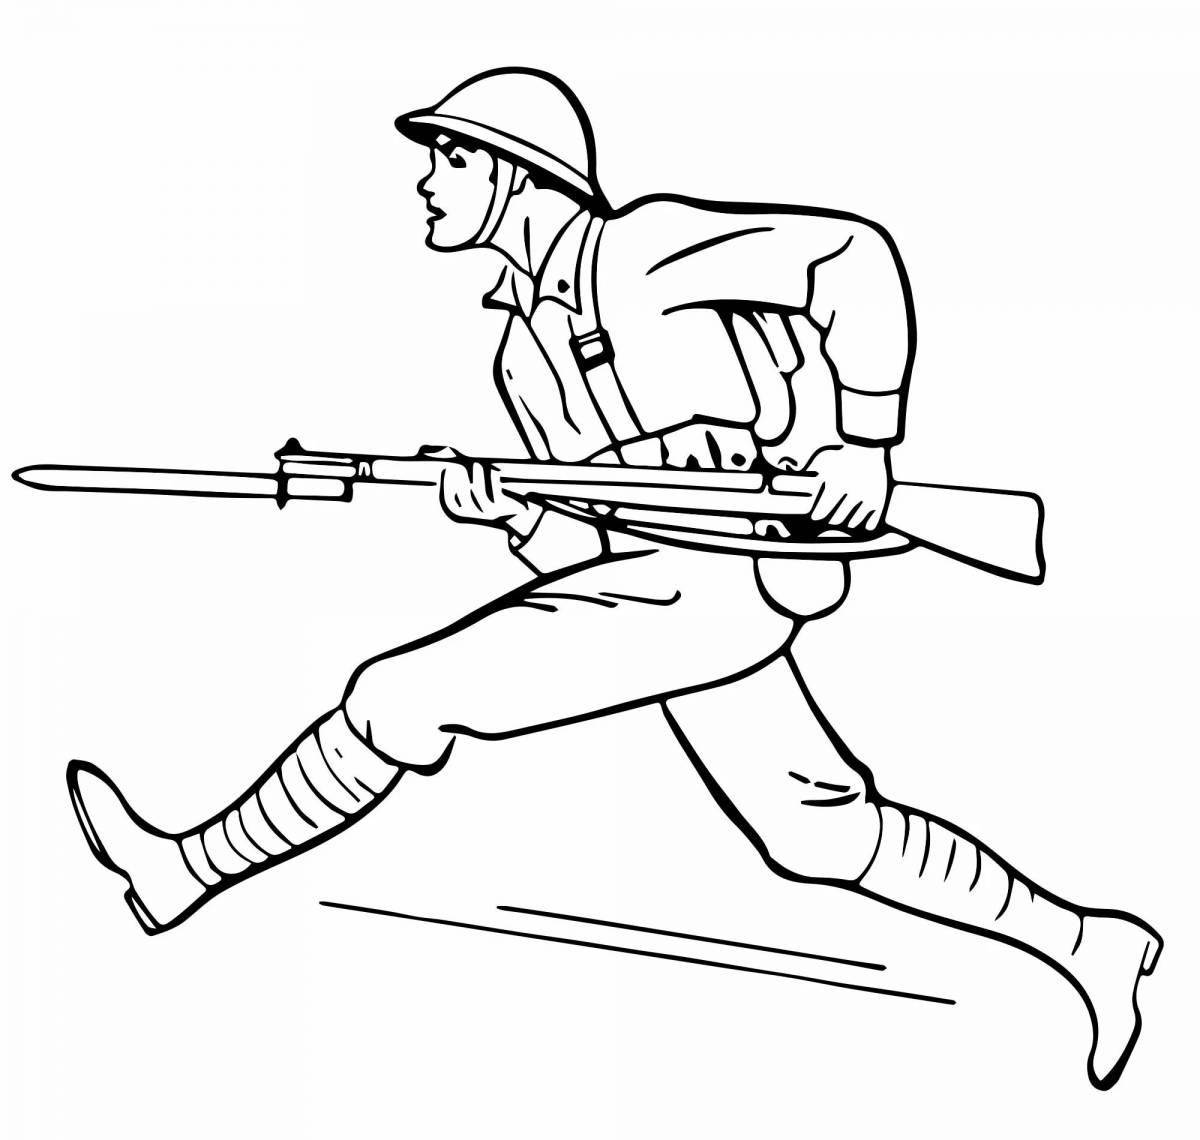 Intriguing Russian soldier coloring book for kids